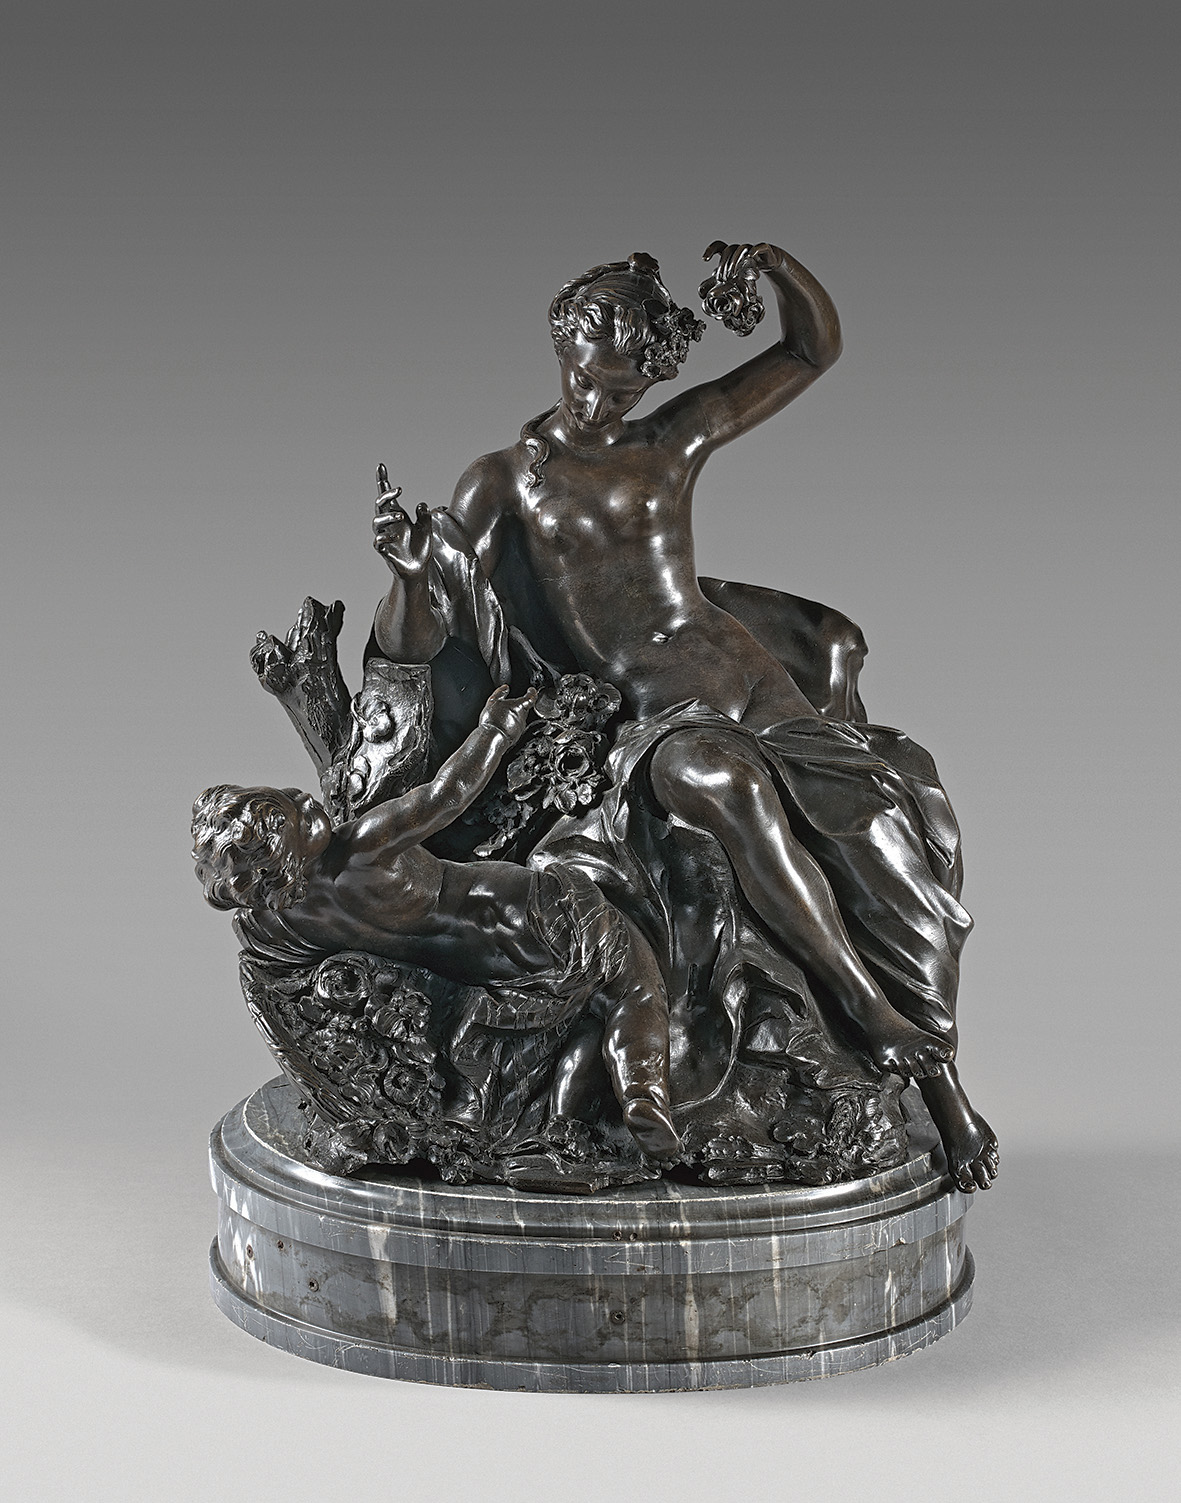 It will take €40,000/60,000 to land this Louis XIV bronze with a medallion patina (35.5 x 34 cm, 13. x 13.18 in) depicting a scantily-clad